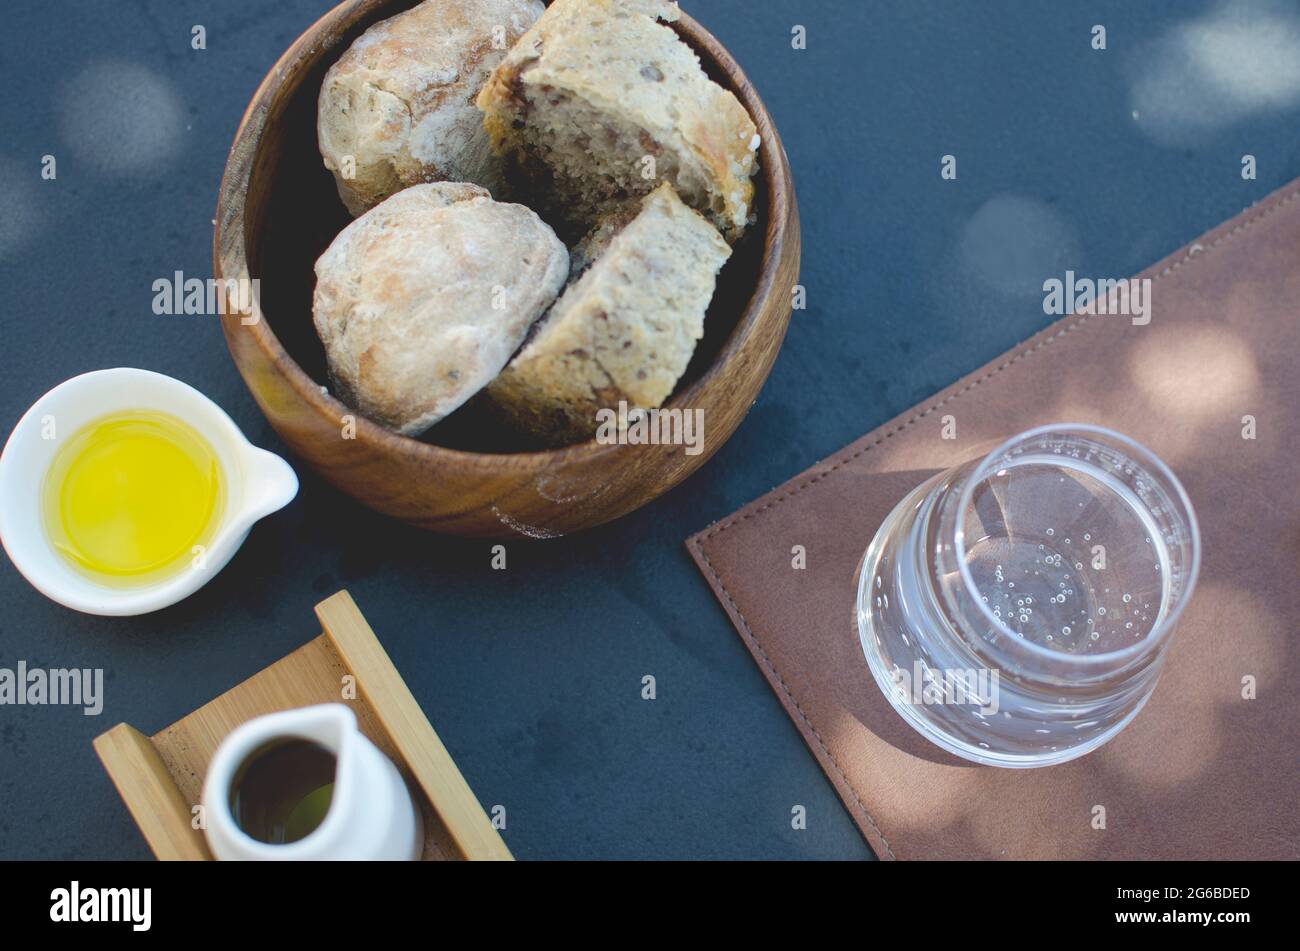 Overhead view of a basket of bread, olive oil and a glass of sparkling water Stock Photo